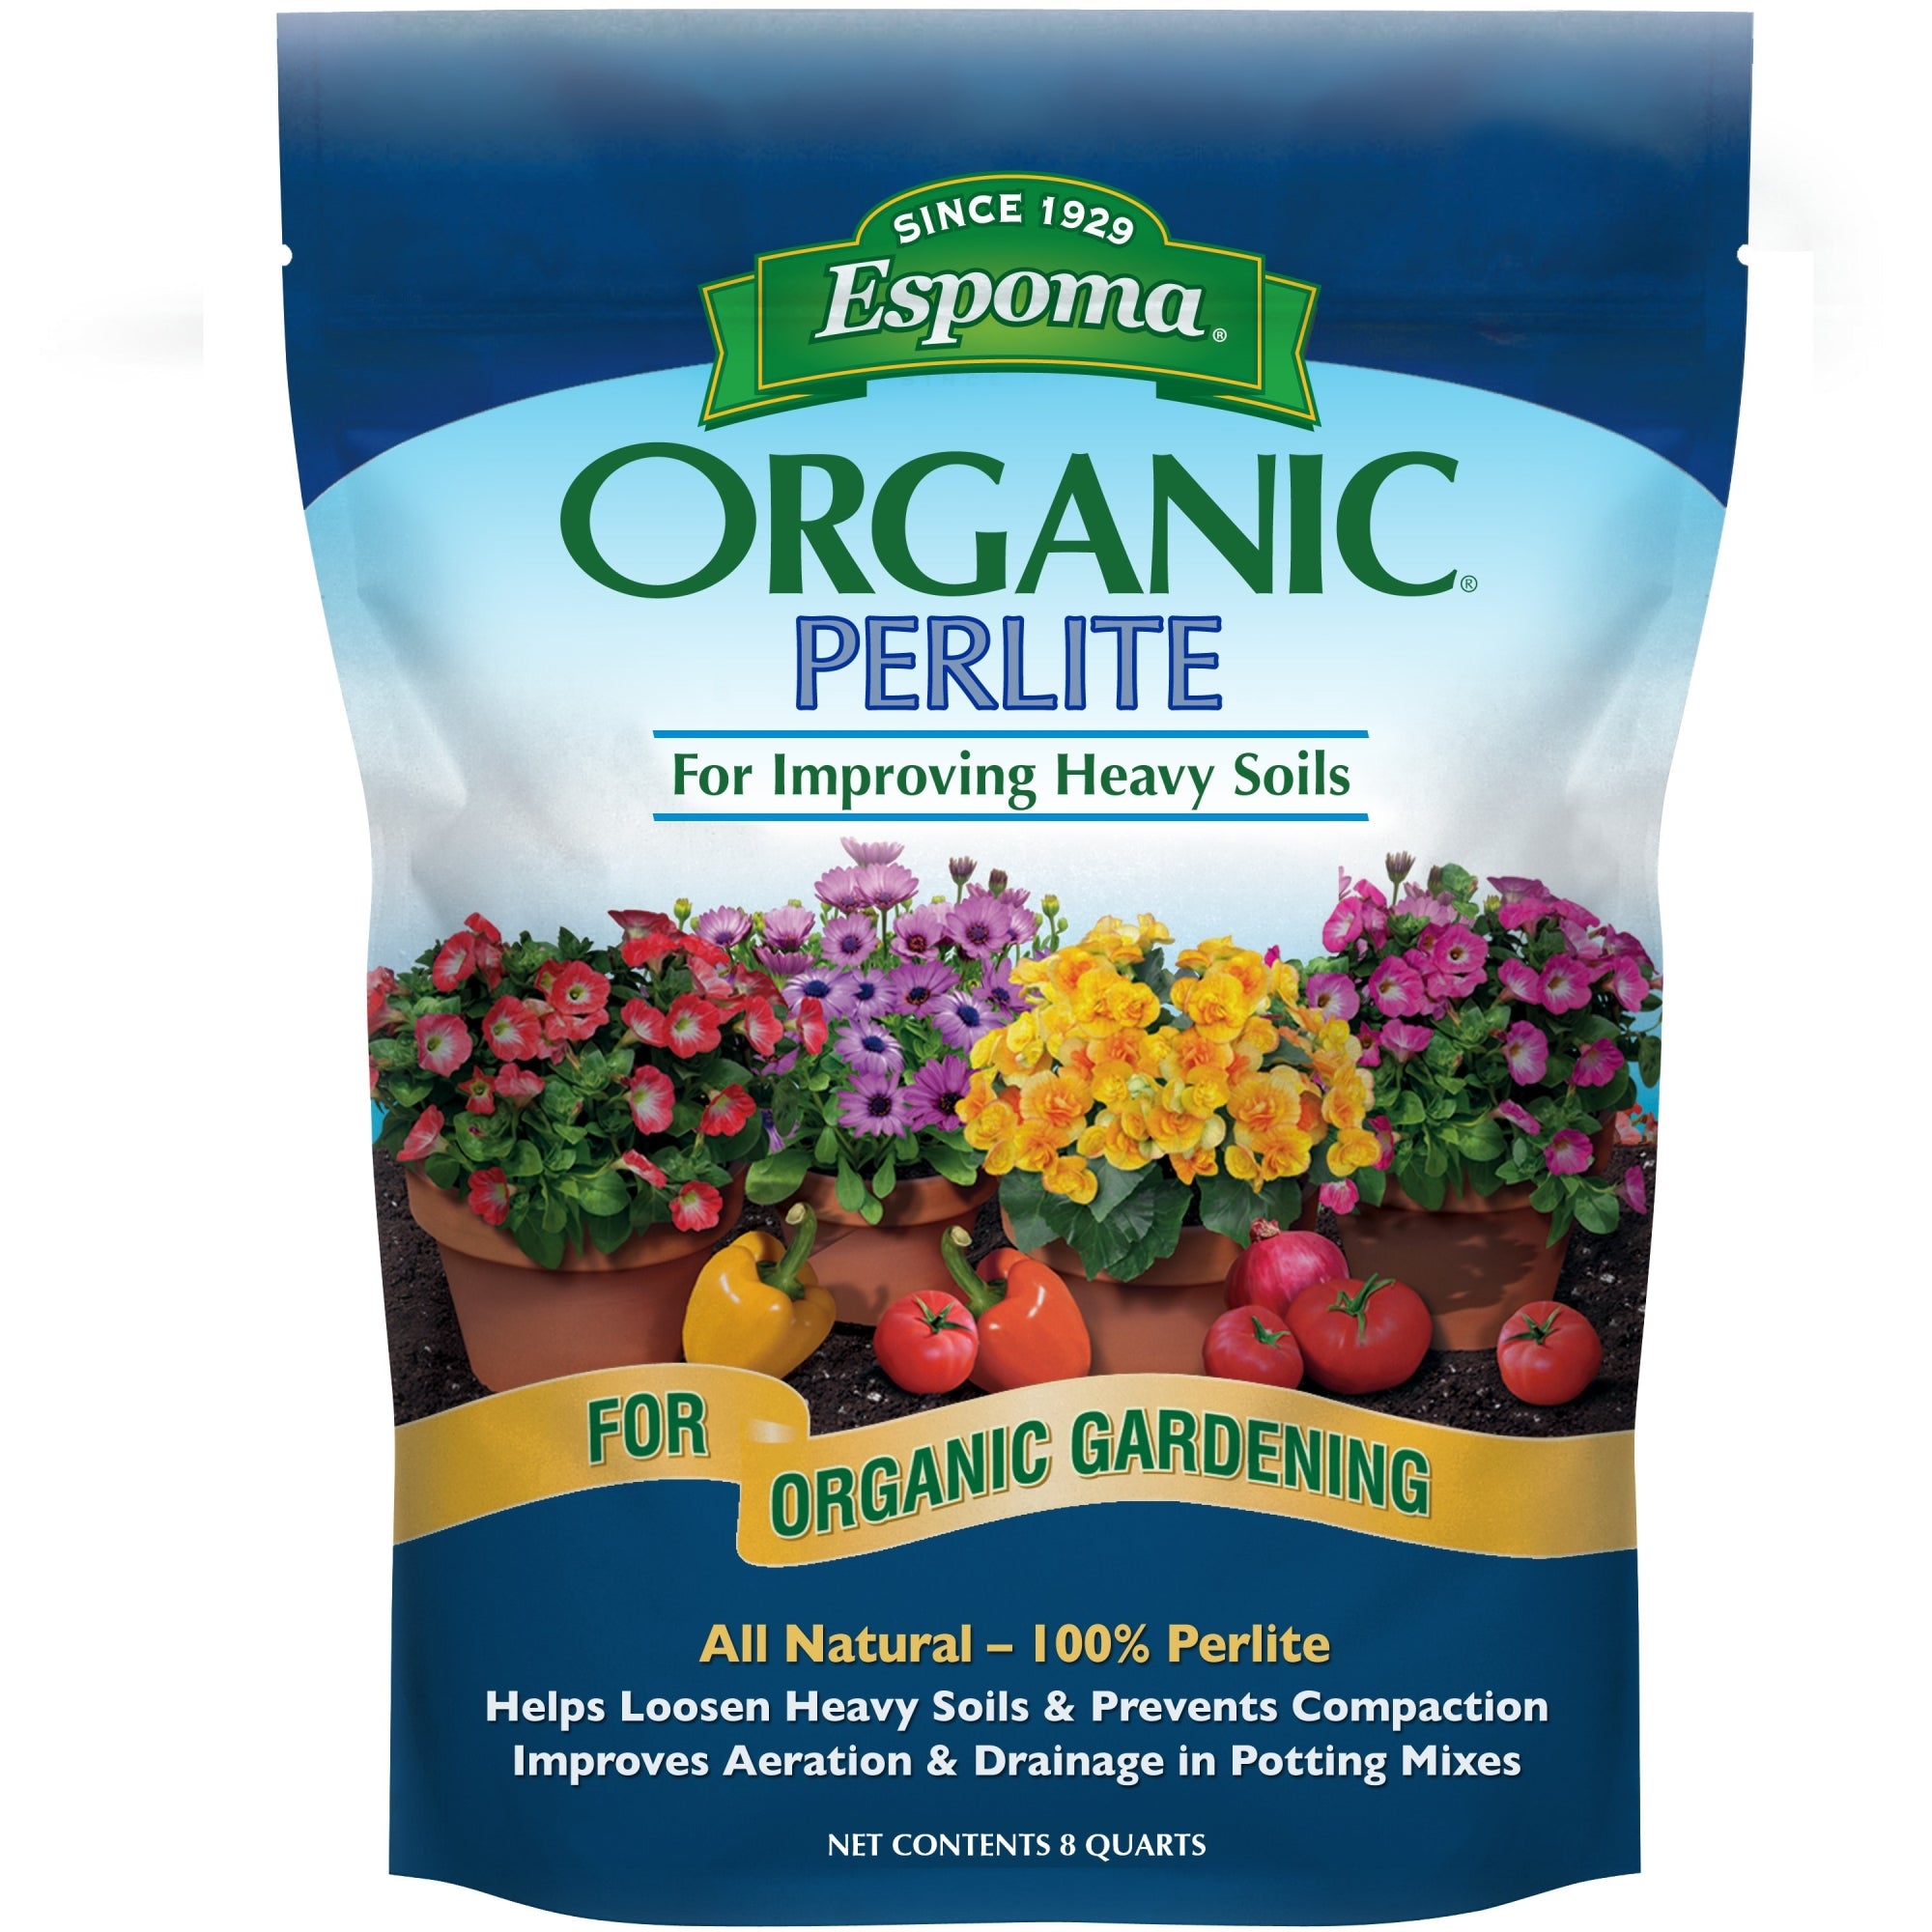 Espoma Organic Perlite, For Improving Heavy Soils for Organic Gardening, Helps Loosen and Aerate Heavy Soils, Prevent Compaction, 8 Qt Bag